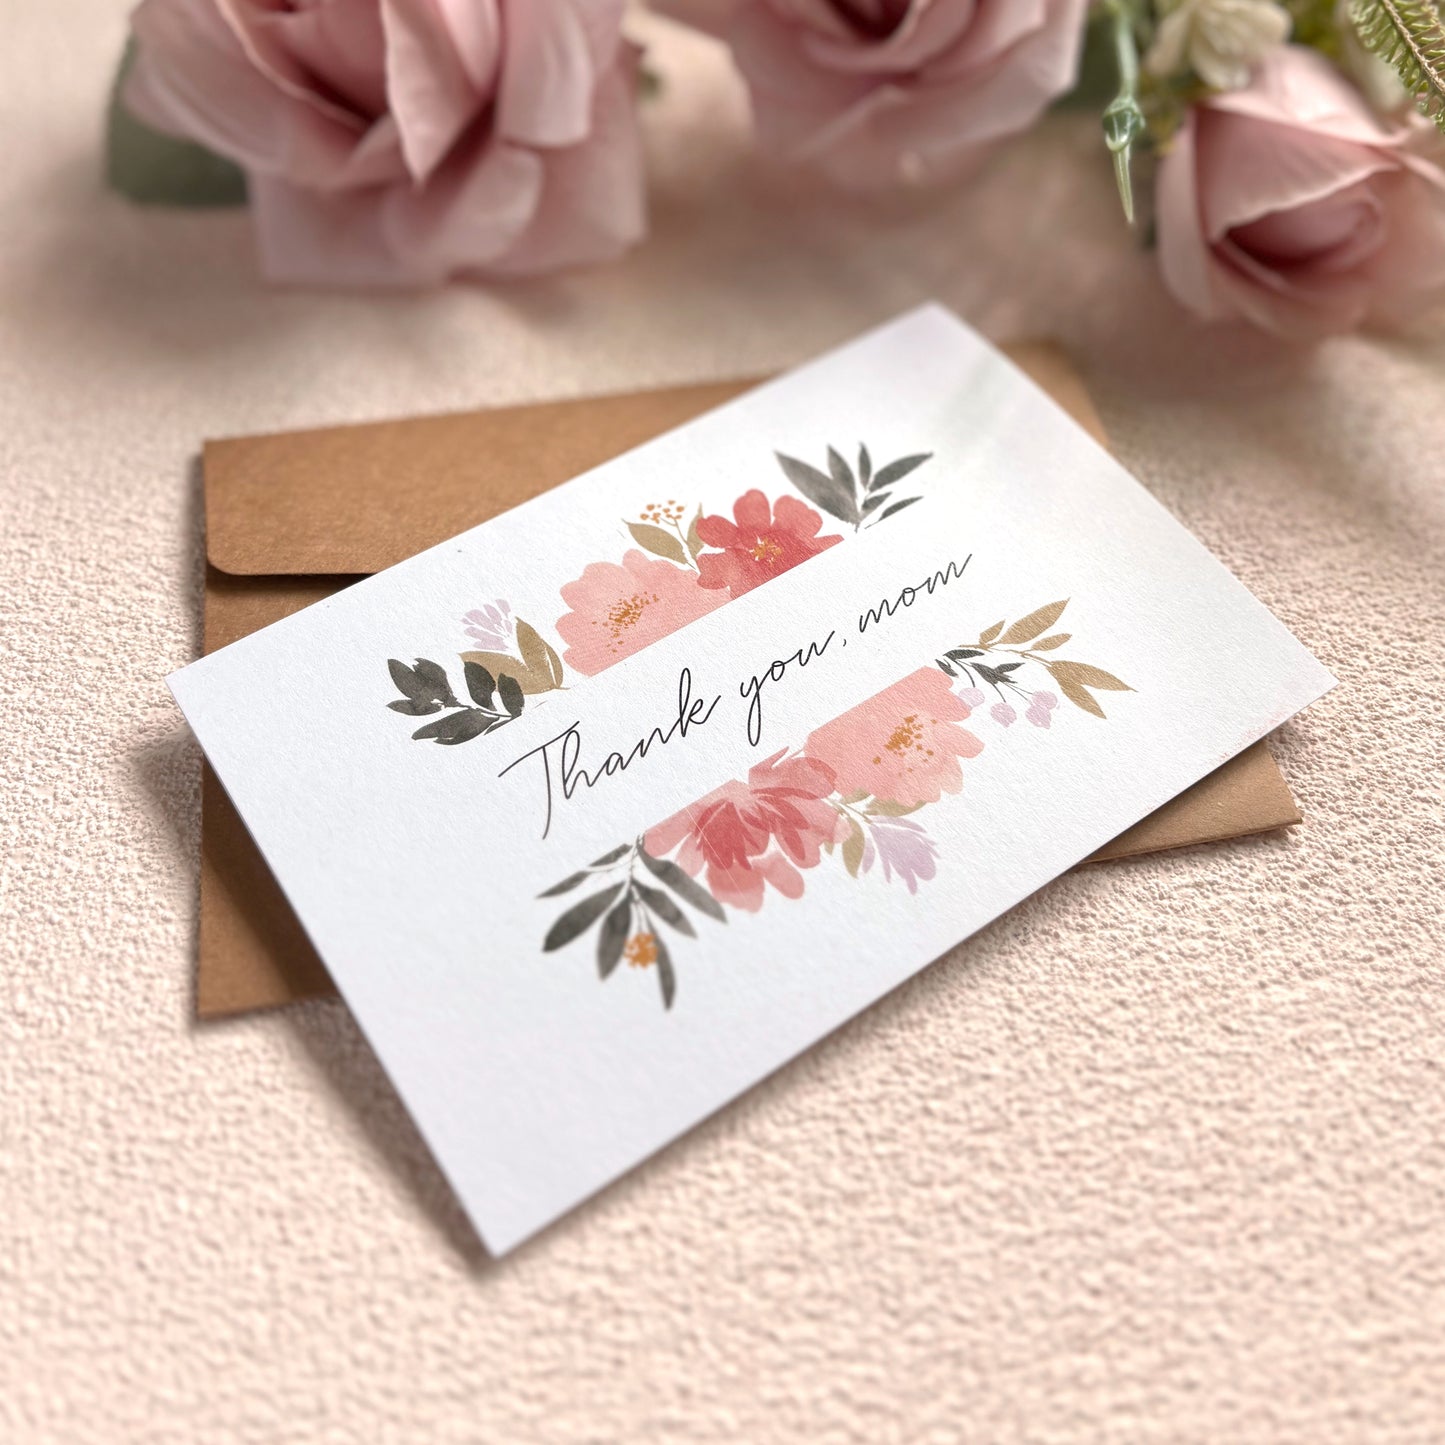 Thank You Mom | Greeting Card